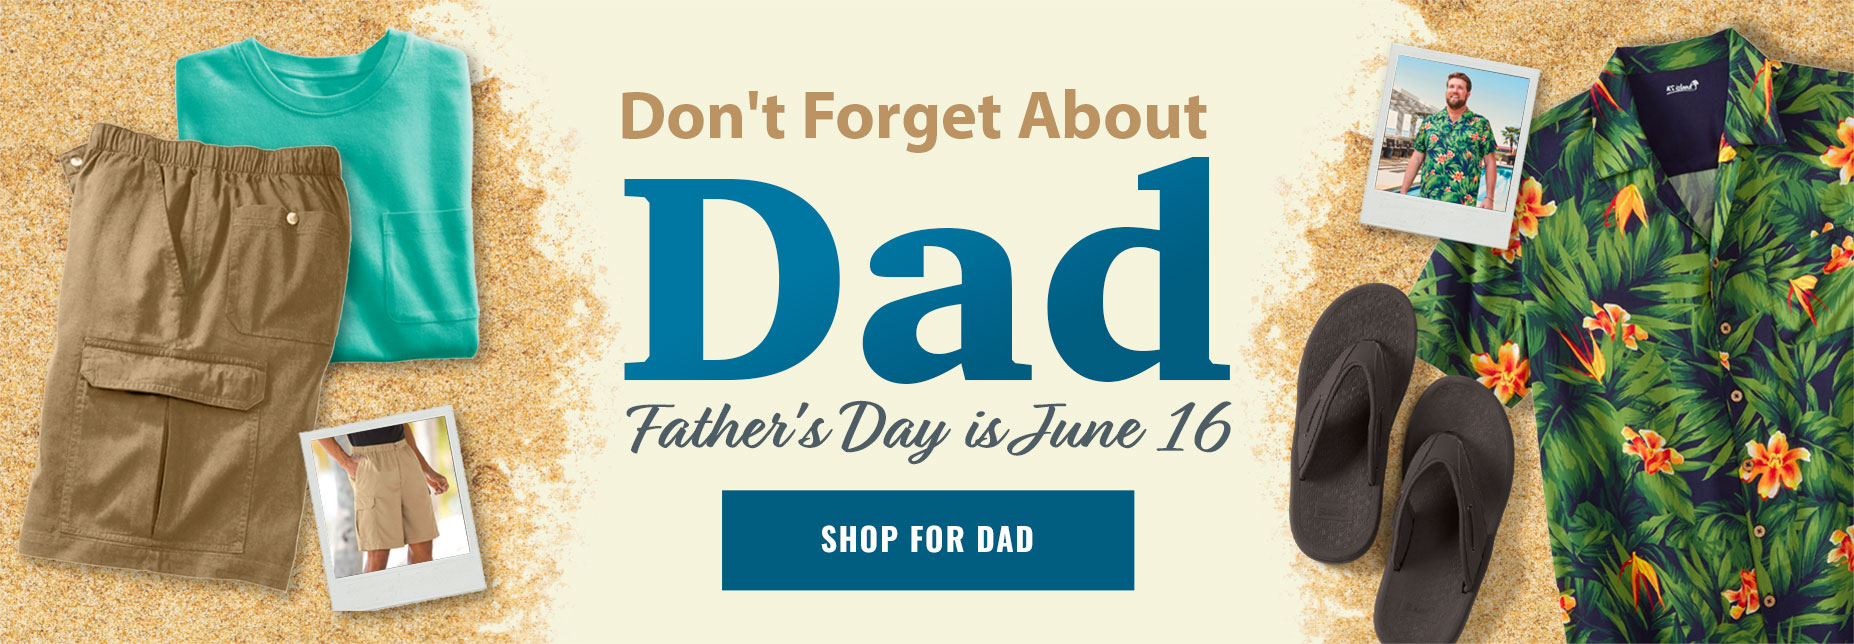 Don't forget About Dad